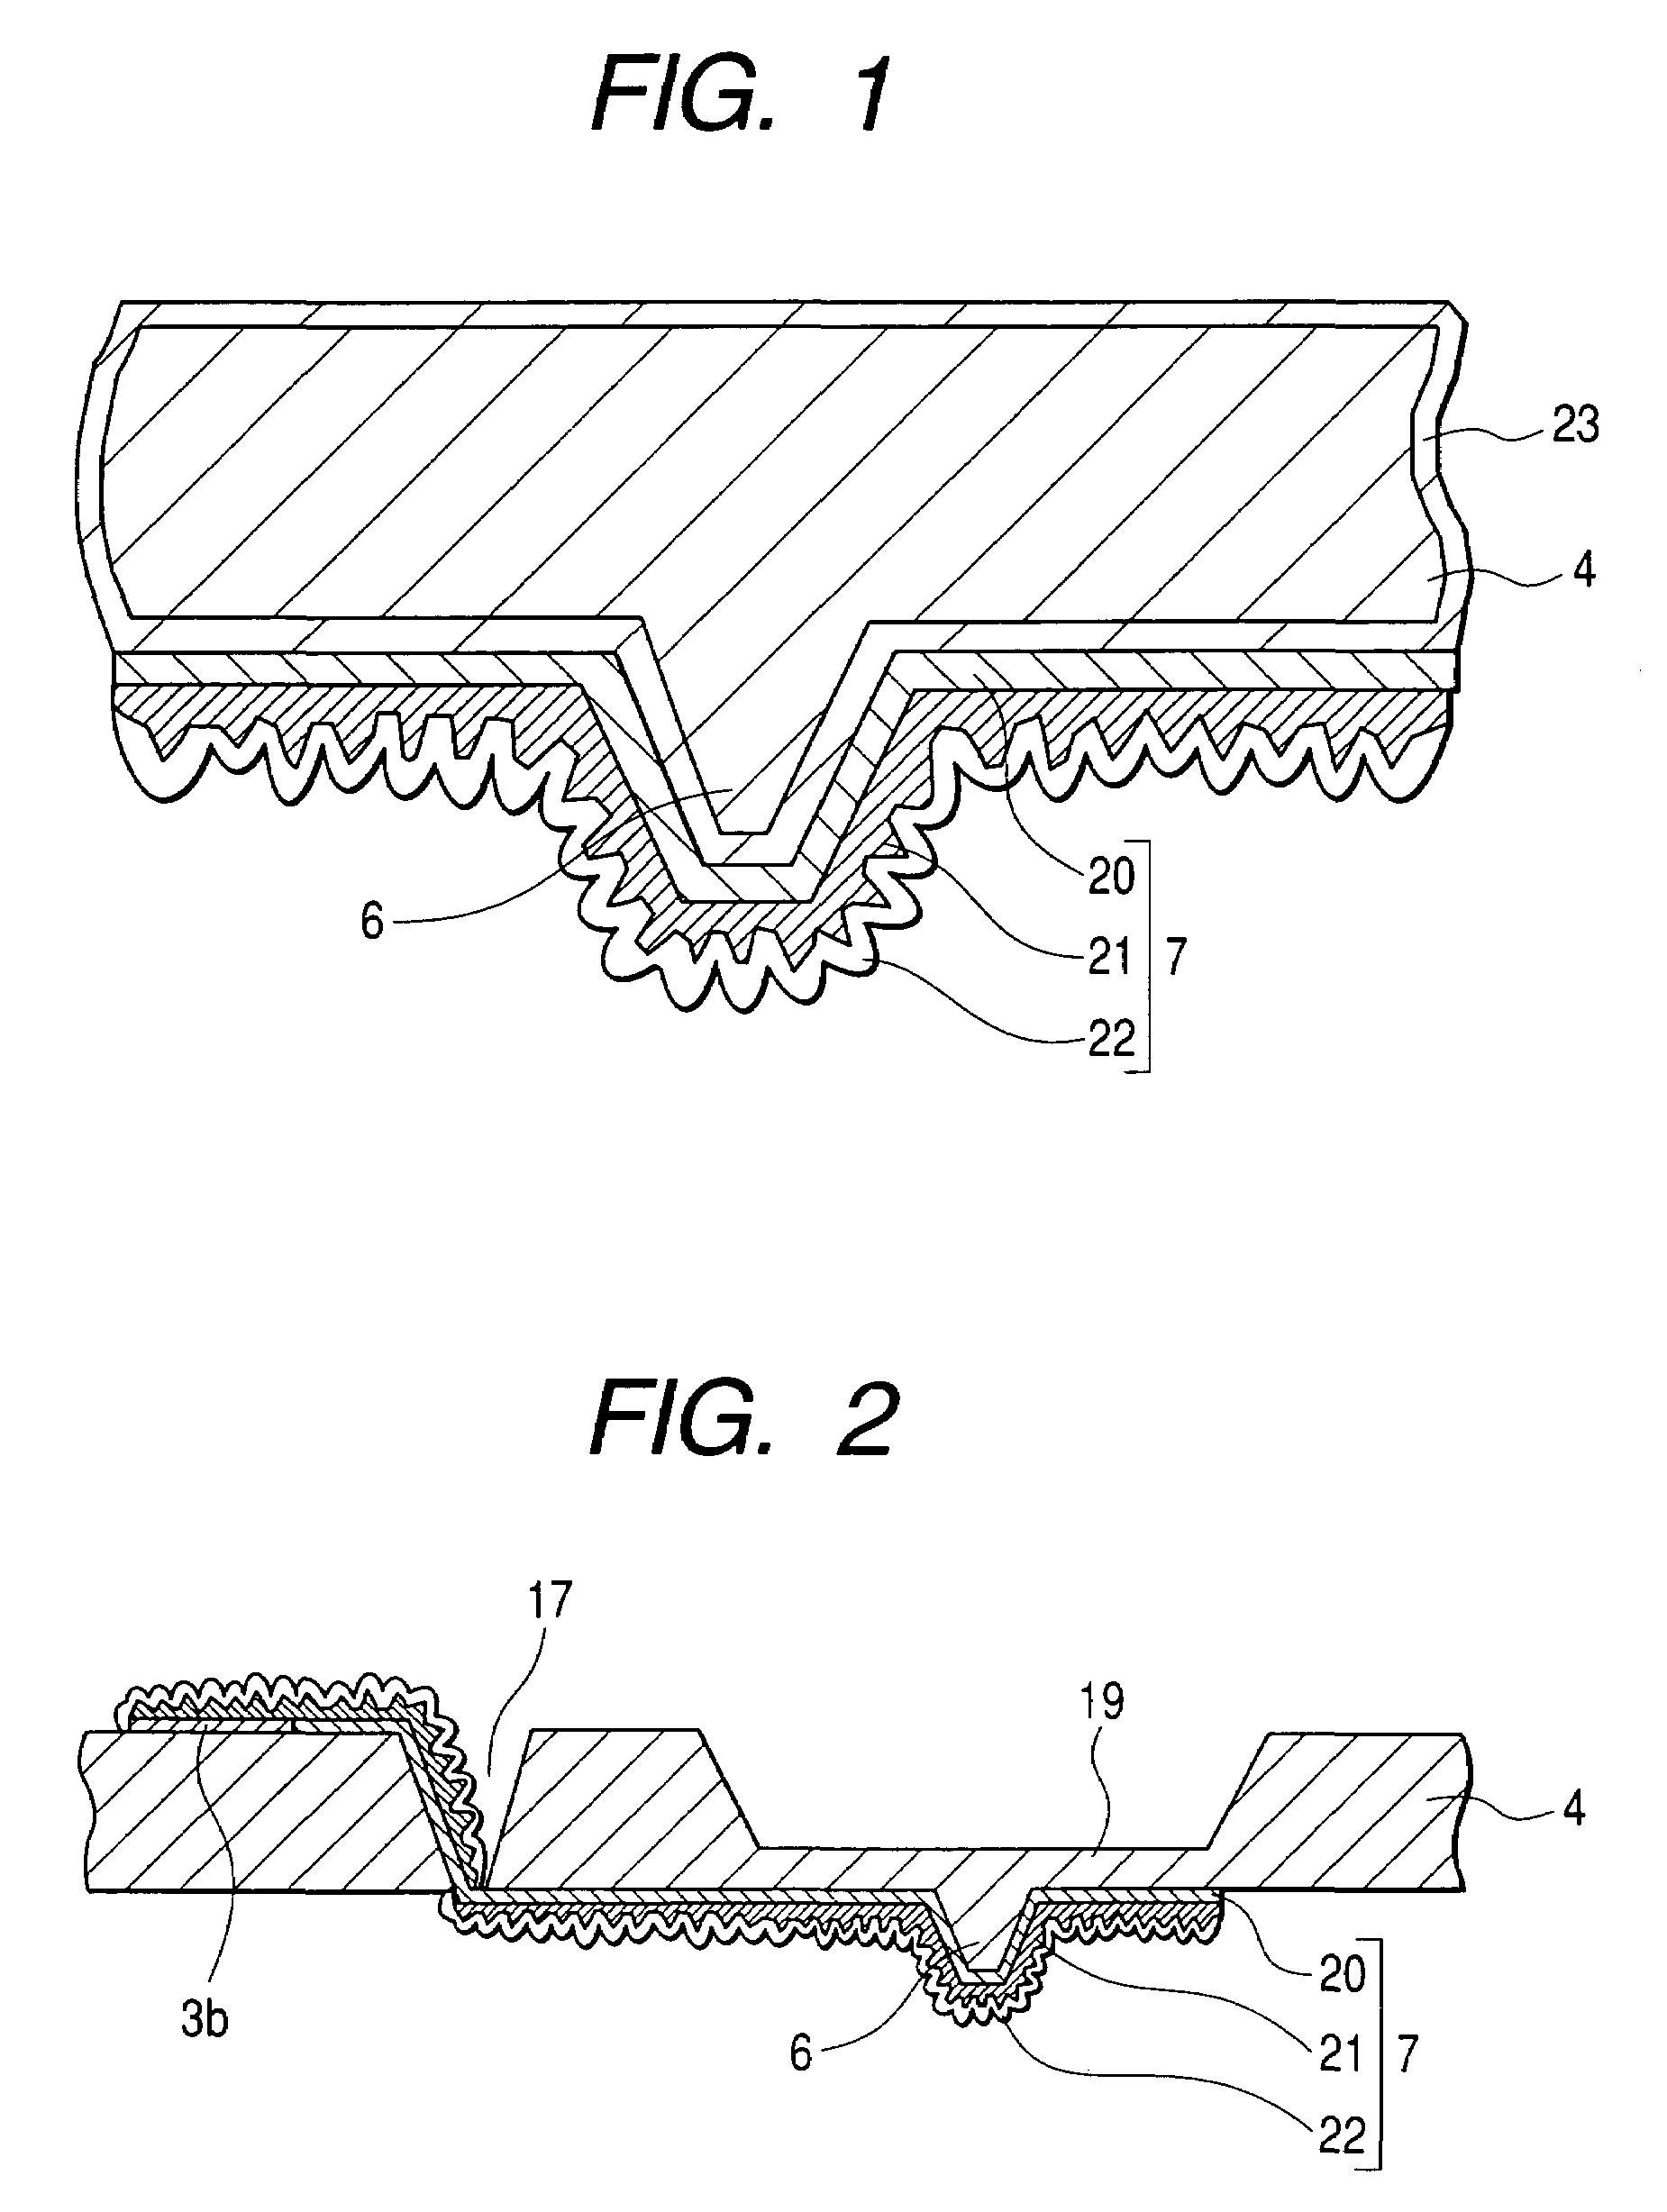 Method of manufacturing a semiconductor device including defect inspection using a semiconductor testing probe